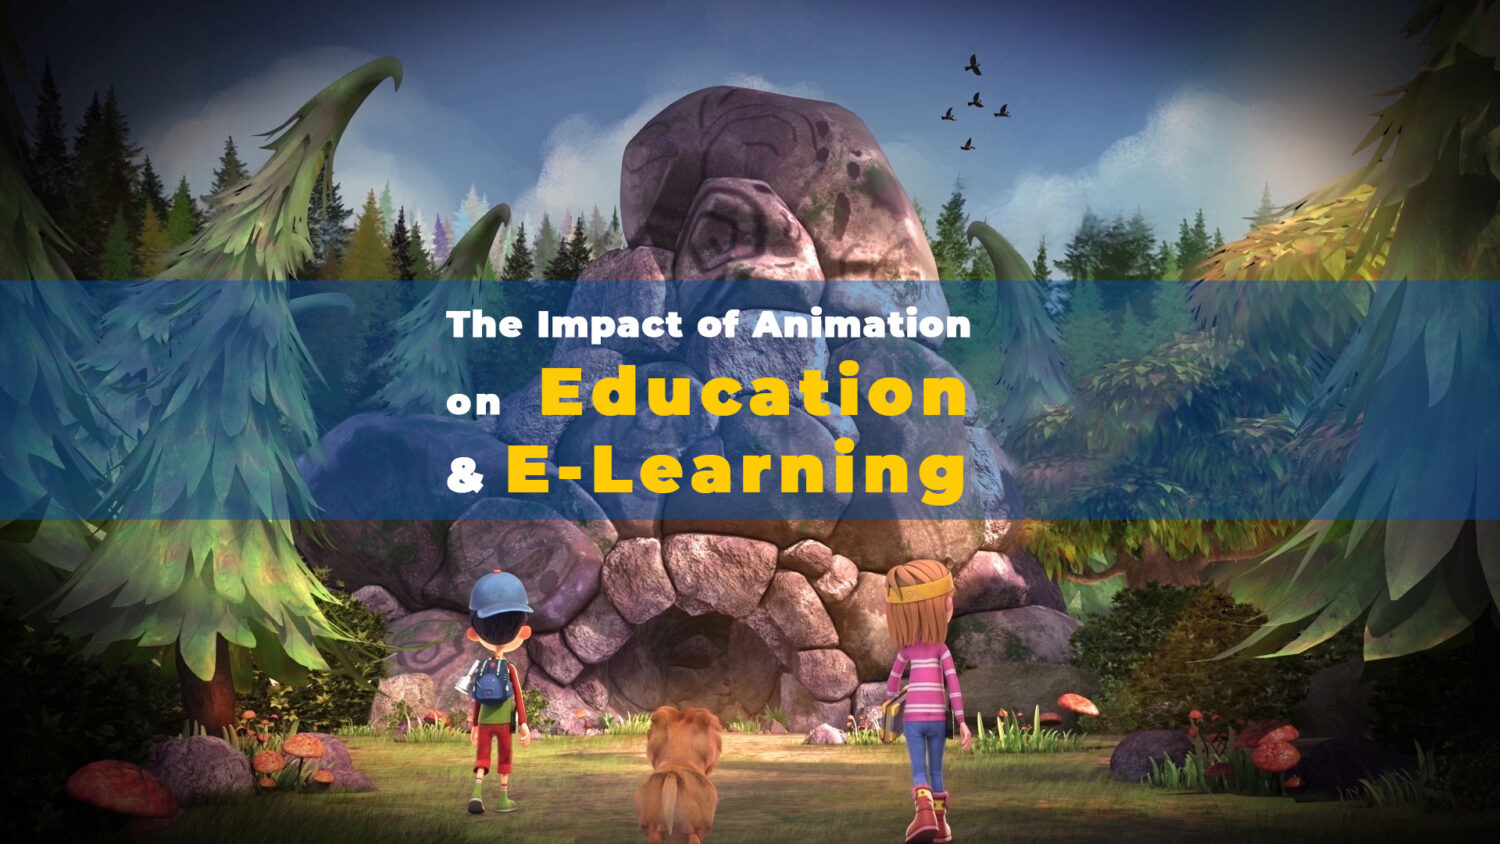 The Impact of Animation on Education and E-Learning